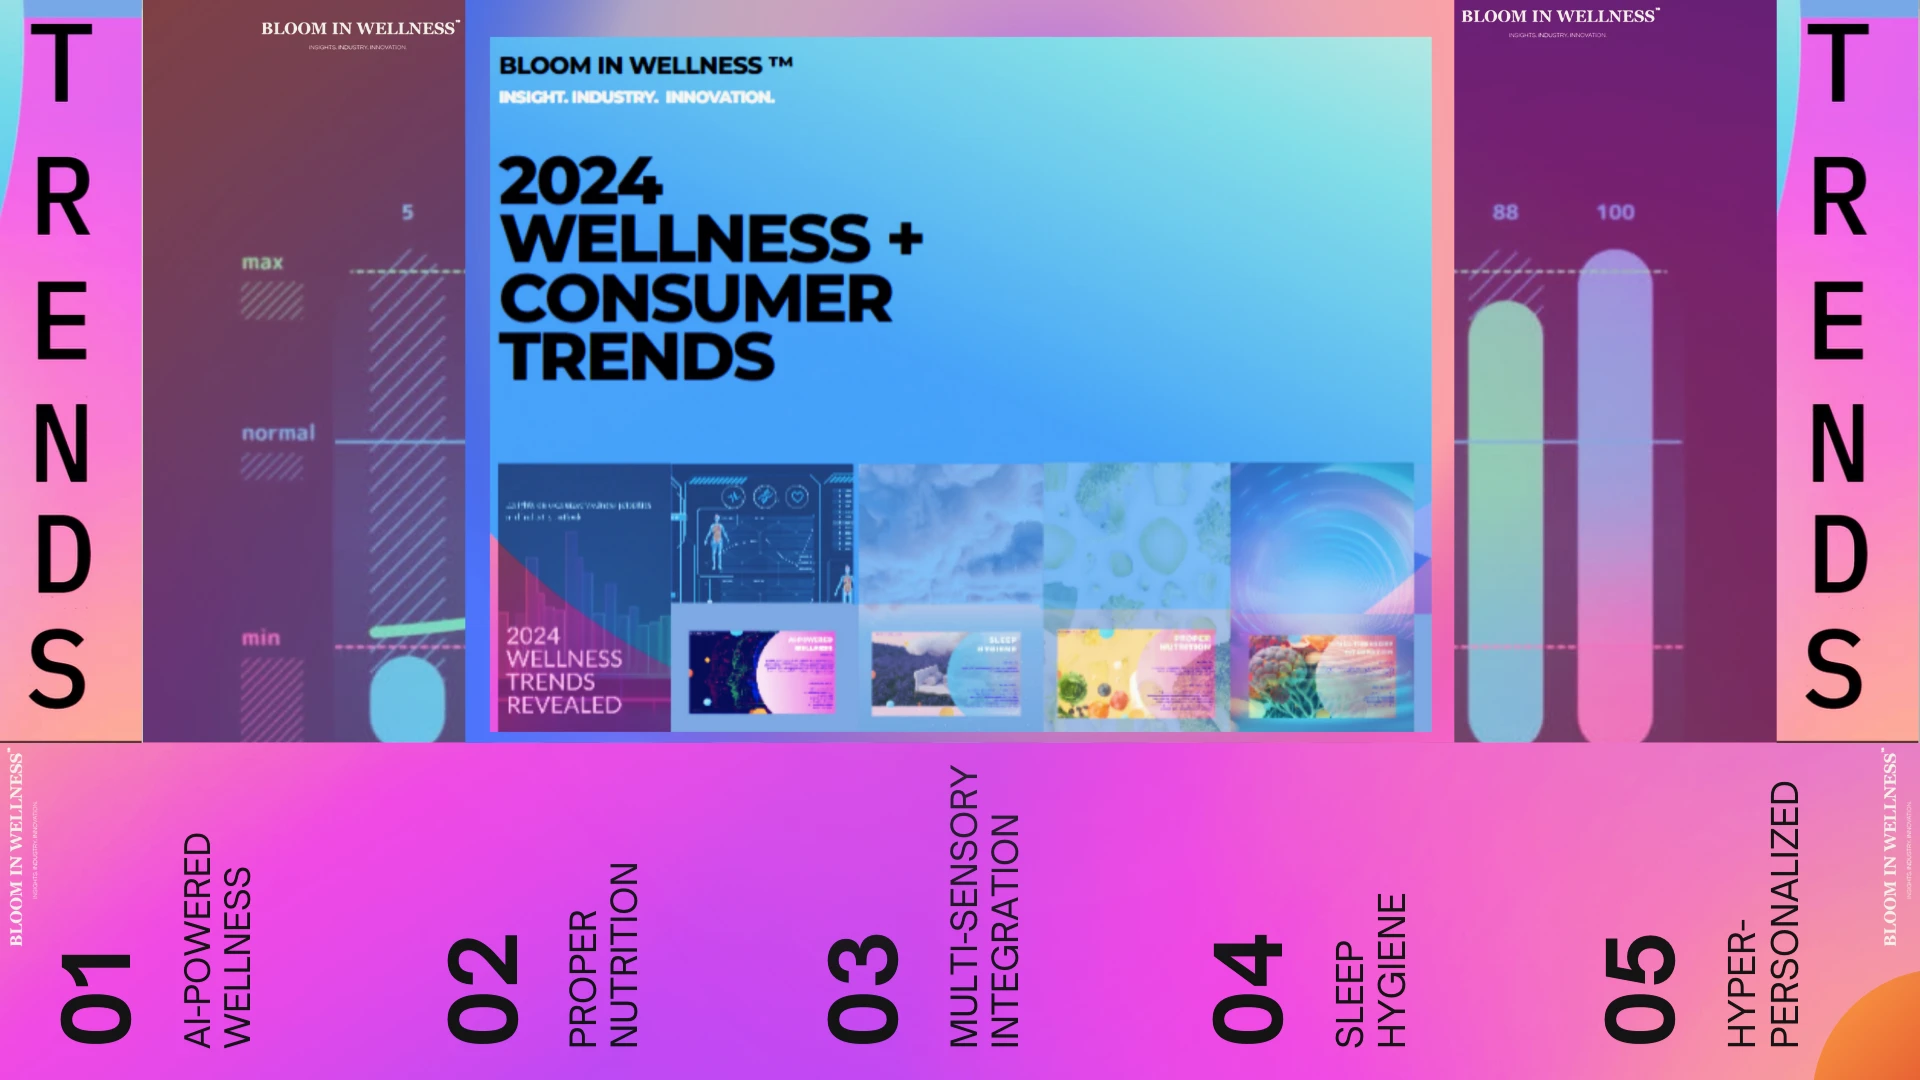 TOP 5 WELLNESS AND CONSUMER TRENDS TO MARK 2024